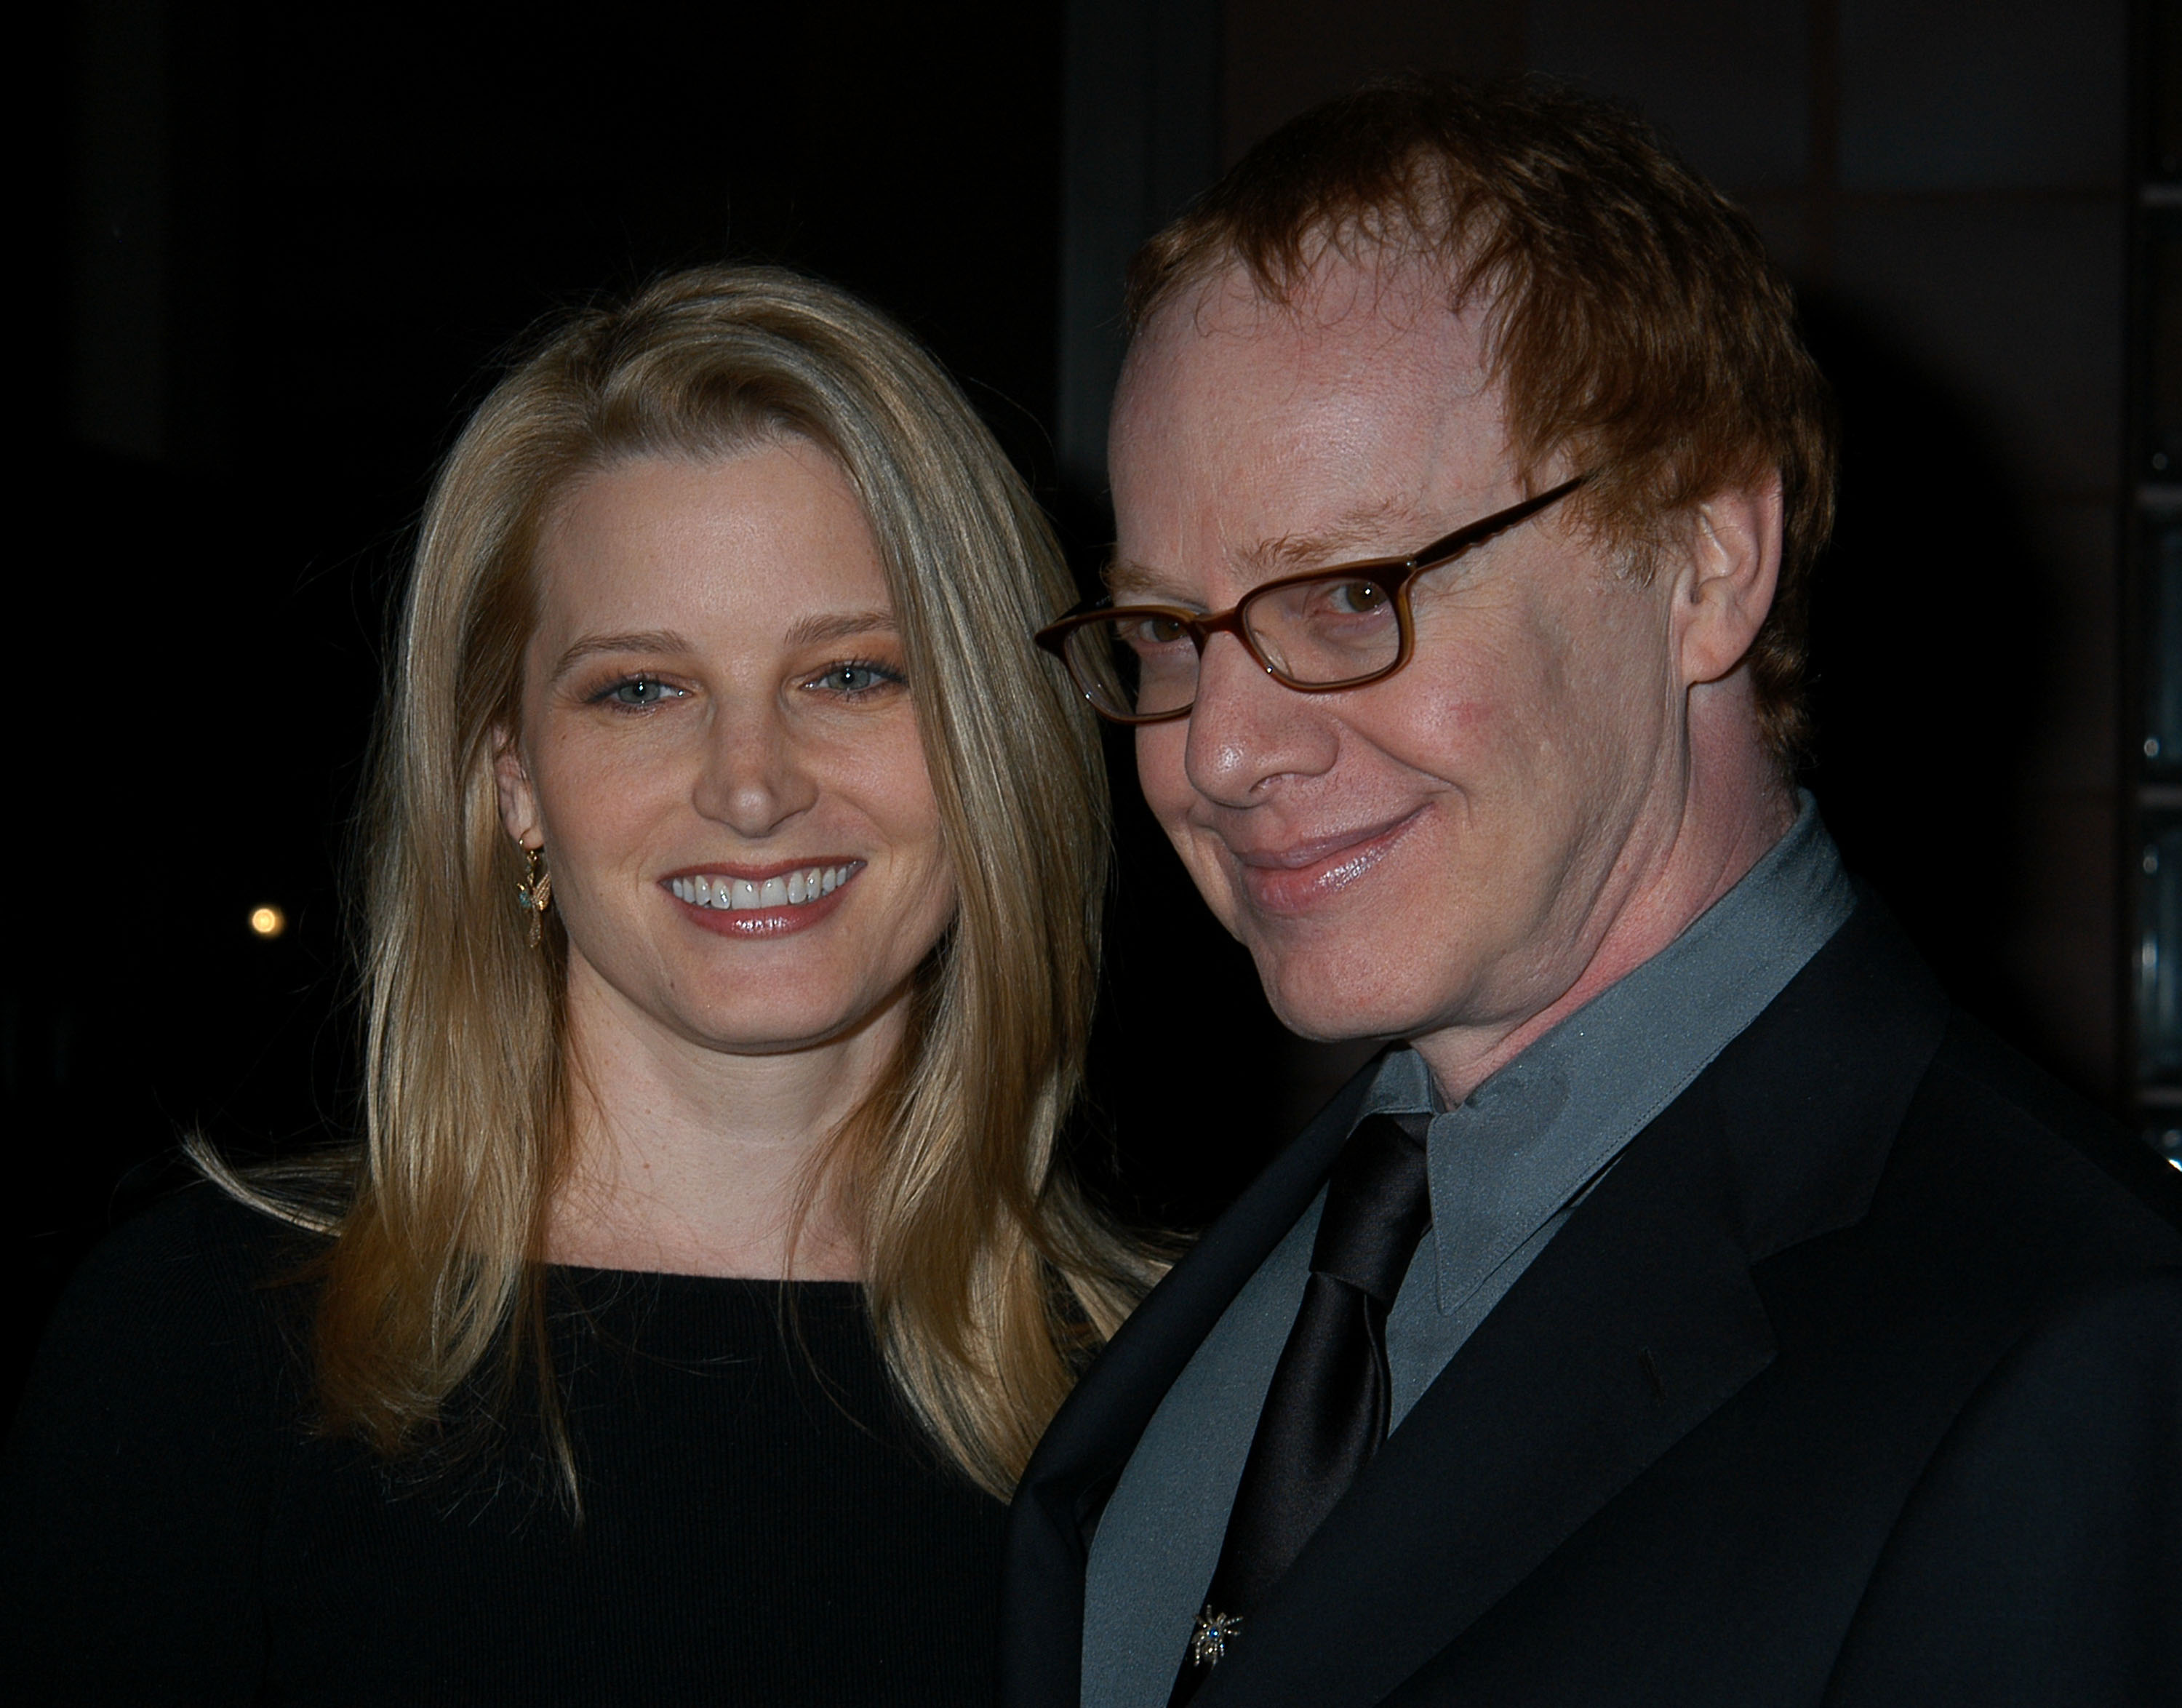 Bridget Fonda and Danny Elfman during 15th Annual Palm Springs International Film Festival Awards at Palm Springs Convention Center on January 11, 2004 in Palm Springs, California. | Source: Getty Images